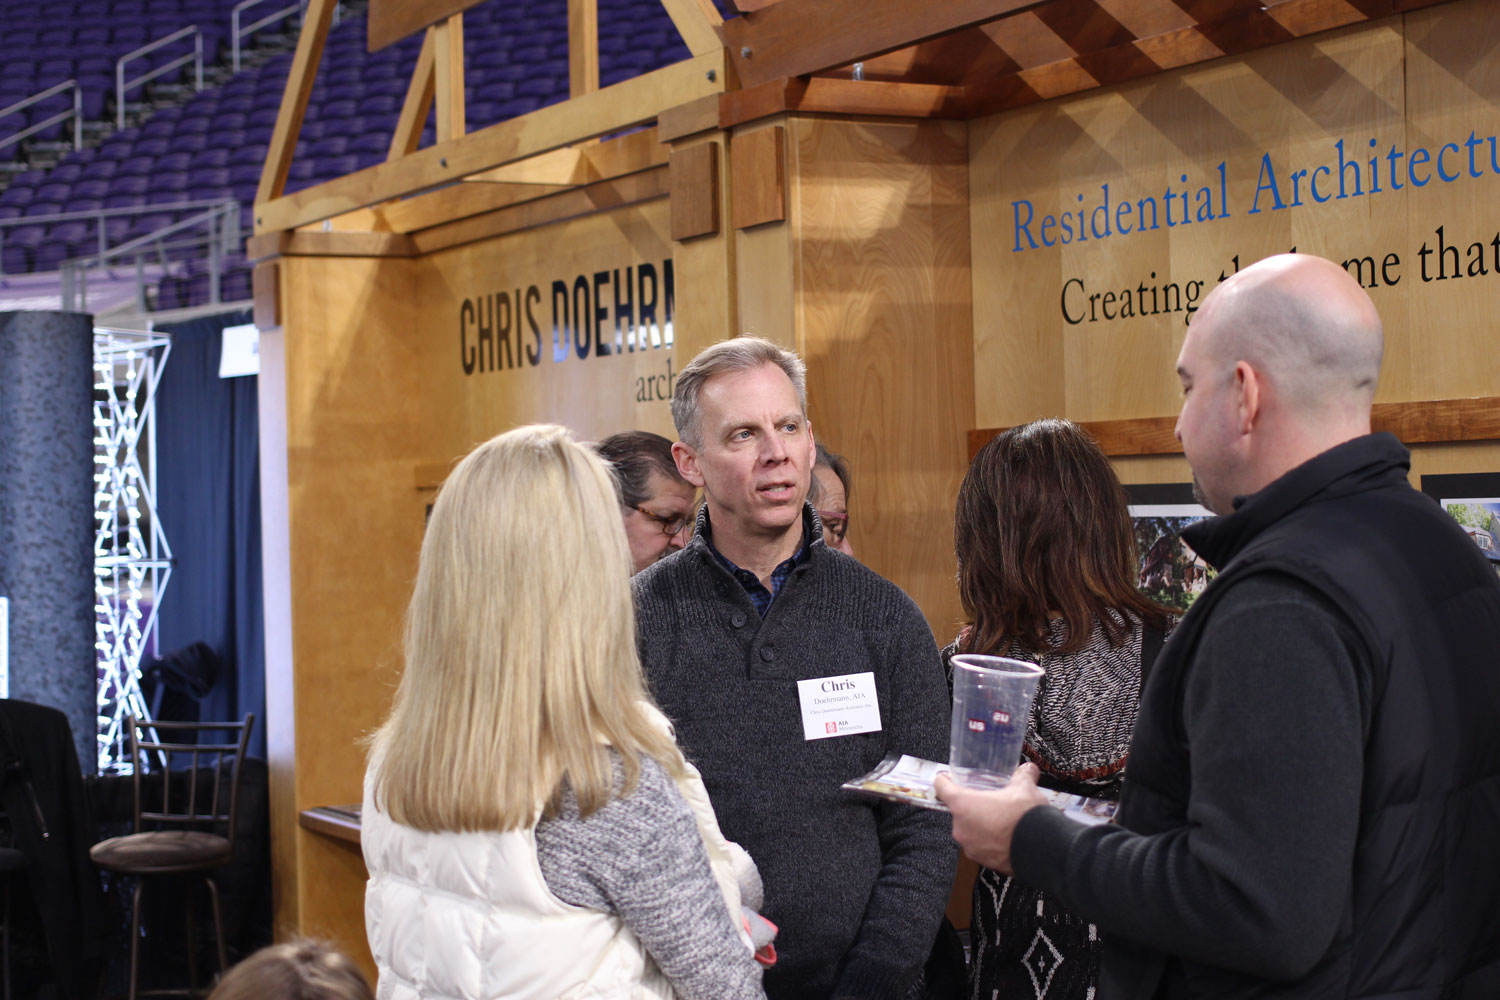 Chris Doehrmann Architect has a client Conversation at the Minneapolis Home and Remodeling Show